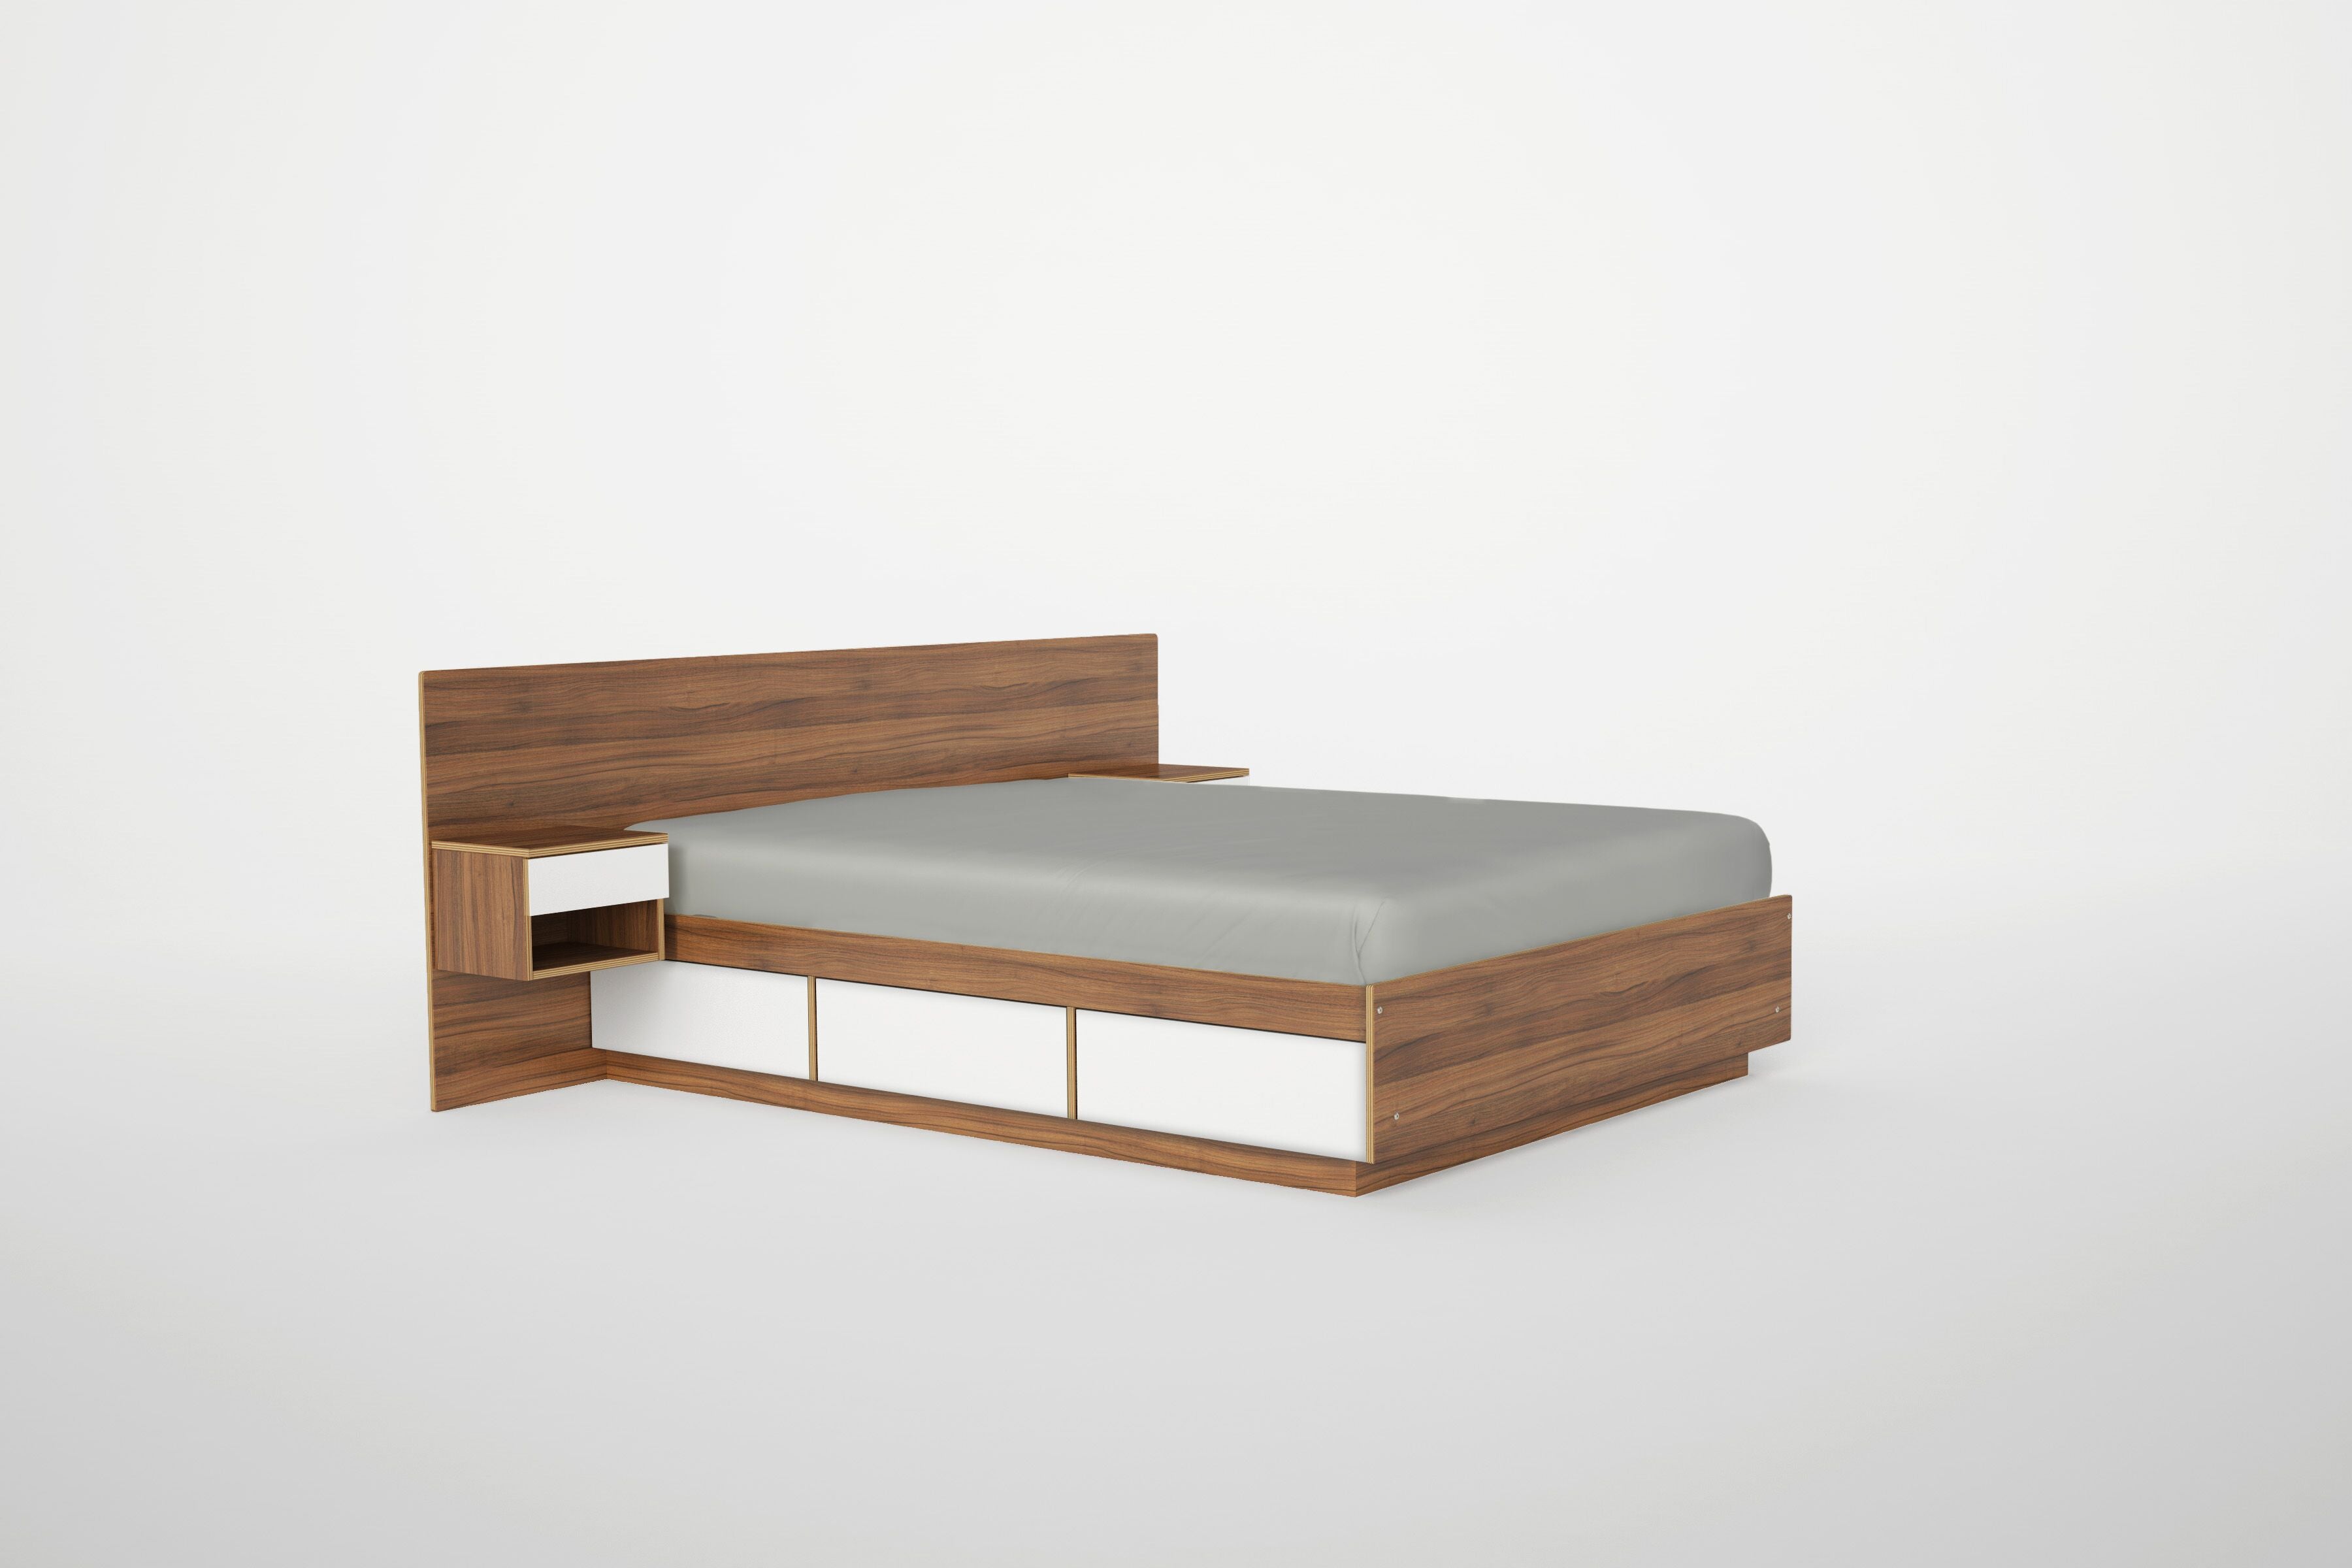 Wooden bed with headboard and storage drawers on white background.